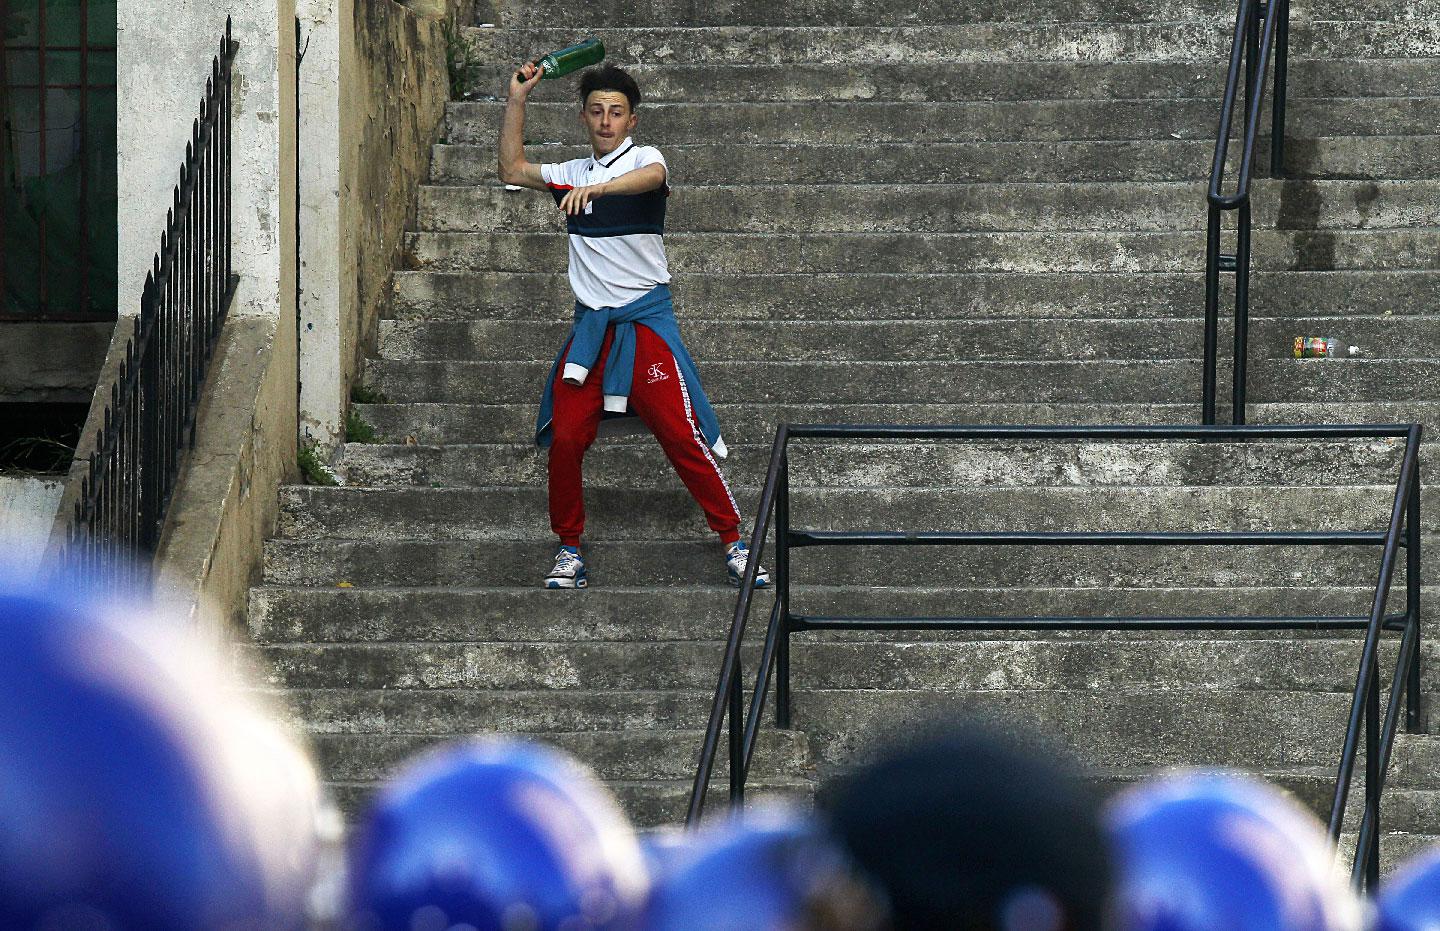 A demonstrator throw a bottle during clashes with police in Algiers, Algeria, March 29, 2019.